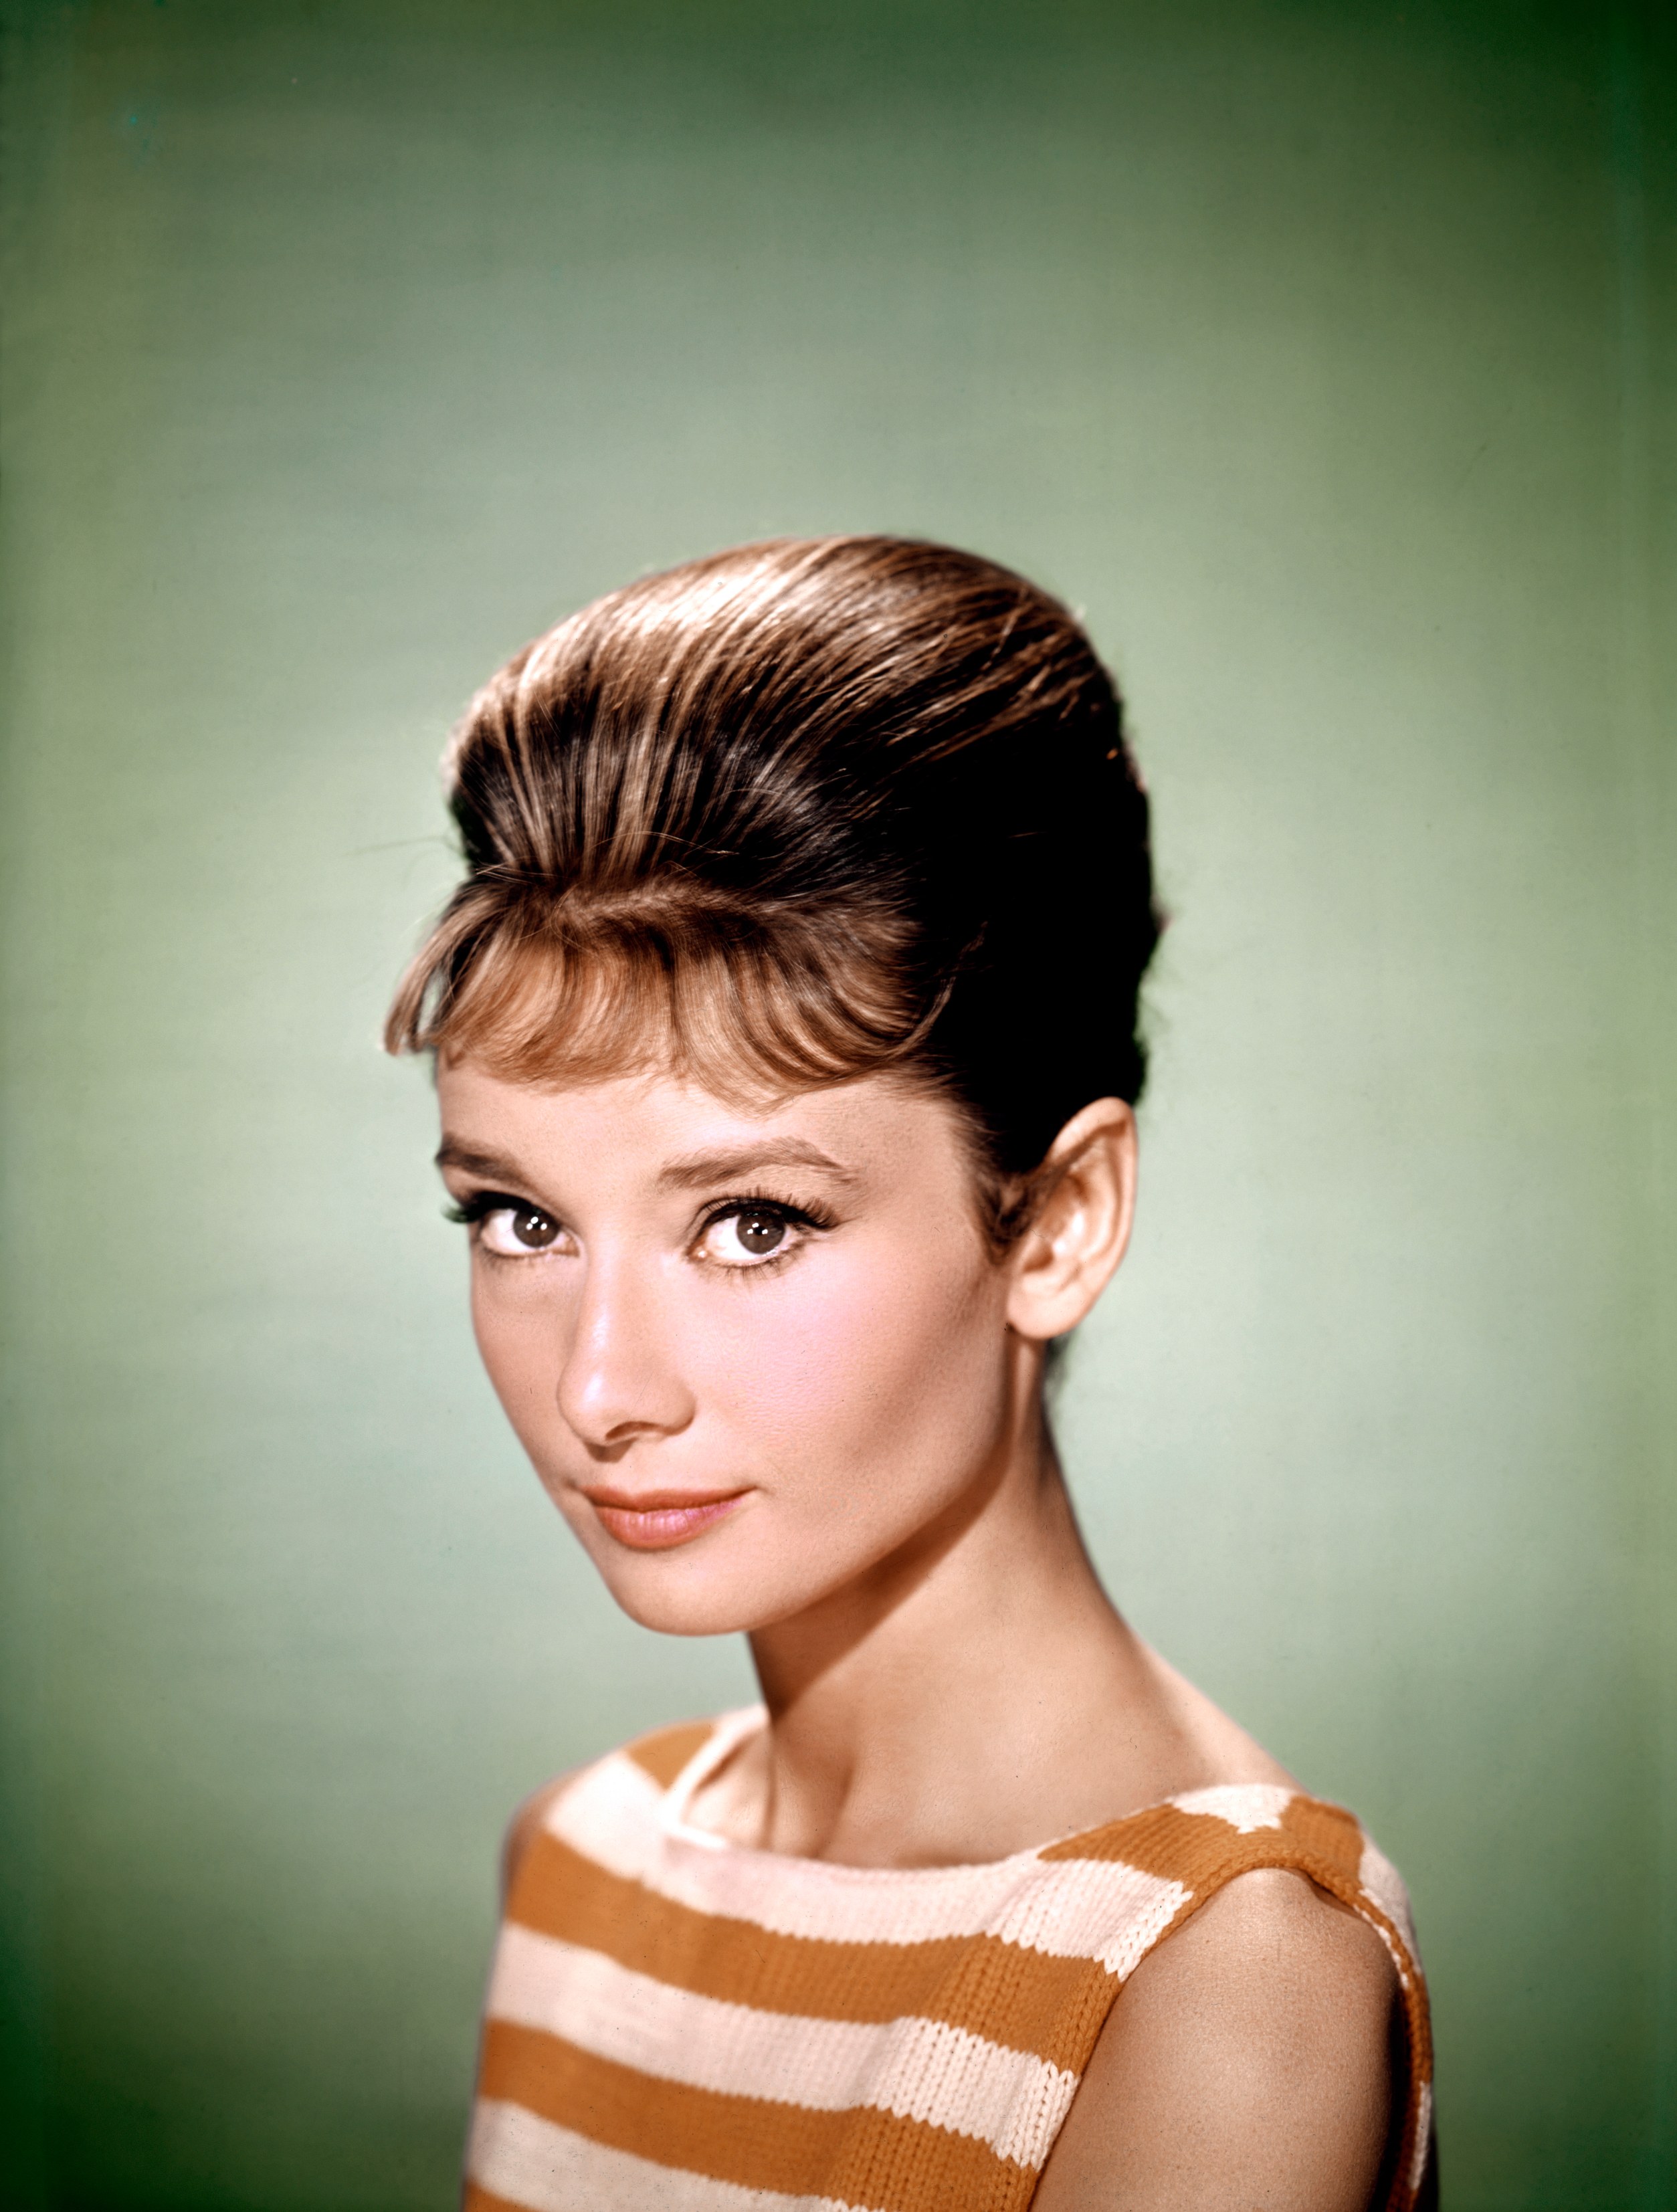 Audrey Hepburn in a sleeveless striped dress with an elegant updo hairstyle